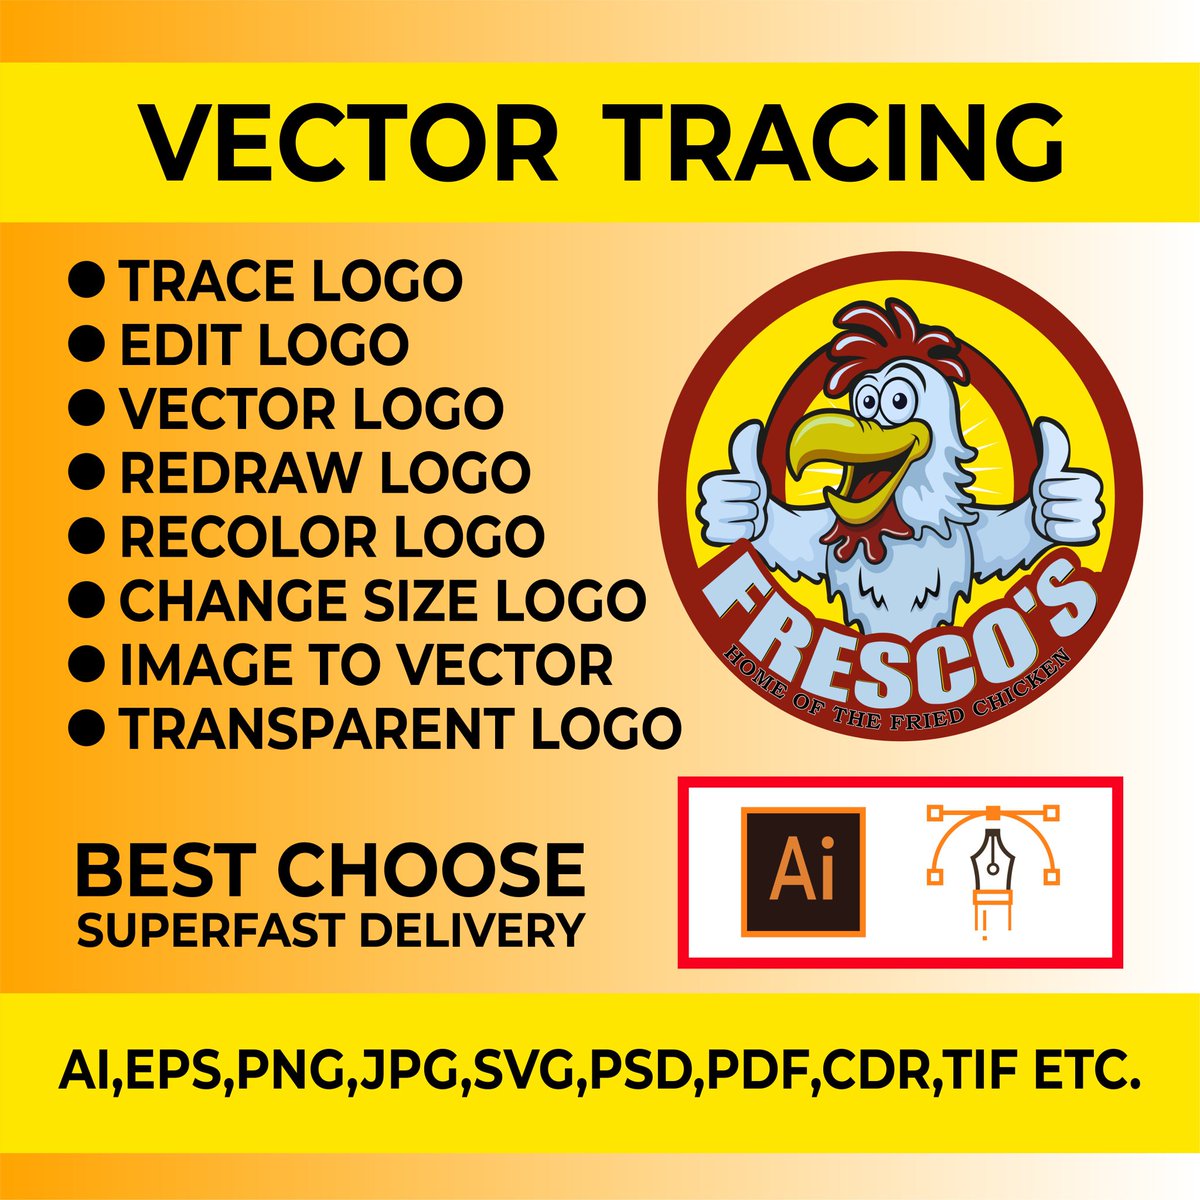 If you like to get vector tracing services for you then follow the bio.
#vectortracing #vectorize #vectorise #vectorized #vectorization #convert_to_vector #image_to_vector #car_vector #logo #logoredesign #usa #author #graphicdesign #graphicdesigner #treevector #Sketch_to_vector